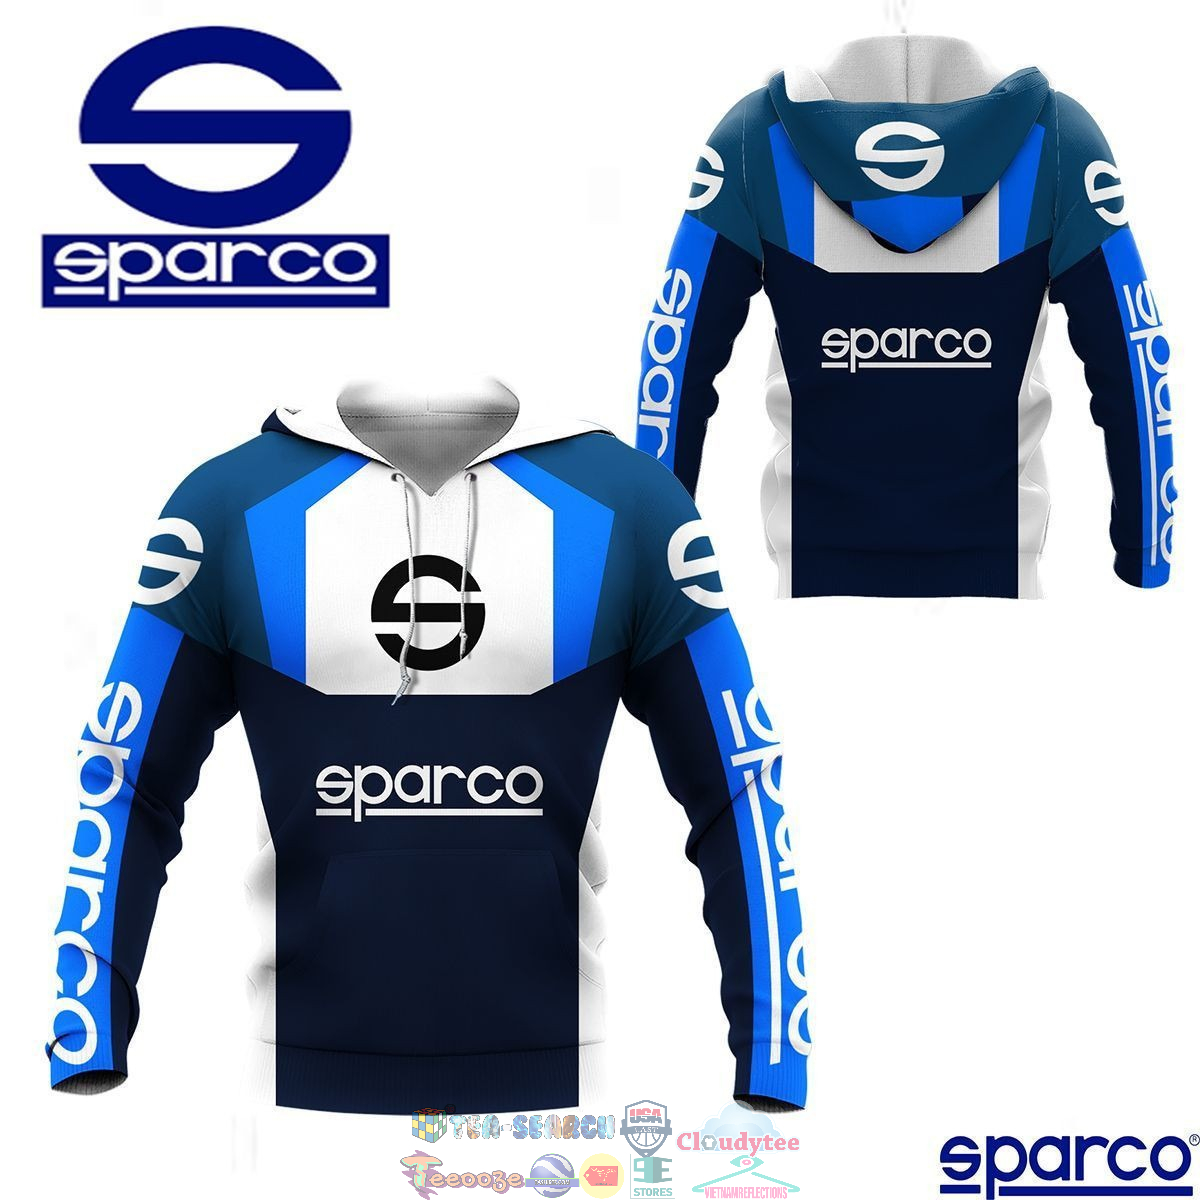 Sparco ver 21 3D hoodie and t-shirt